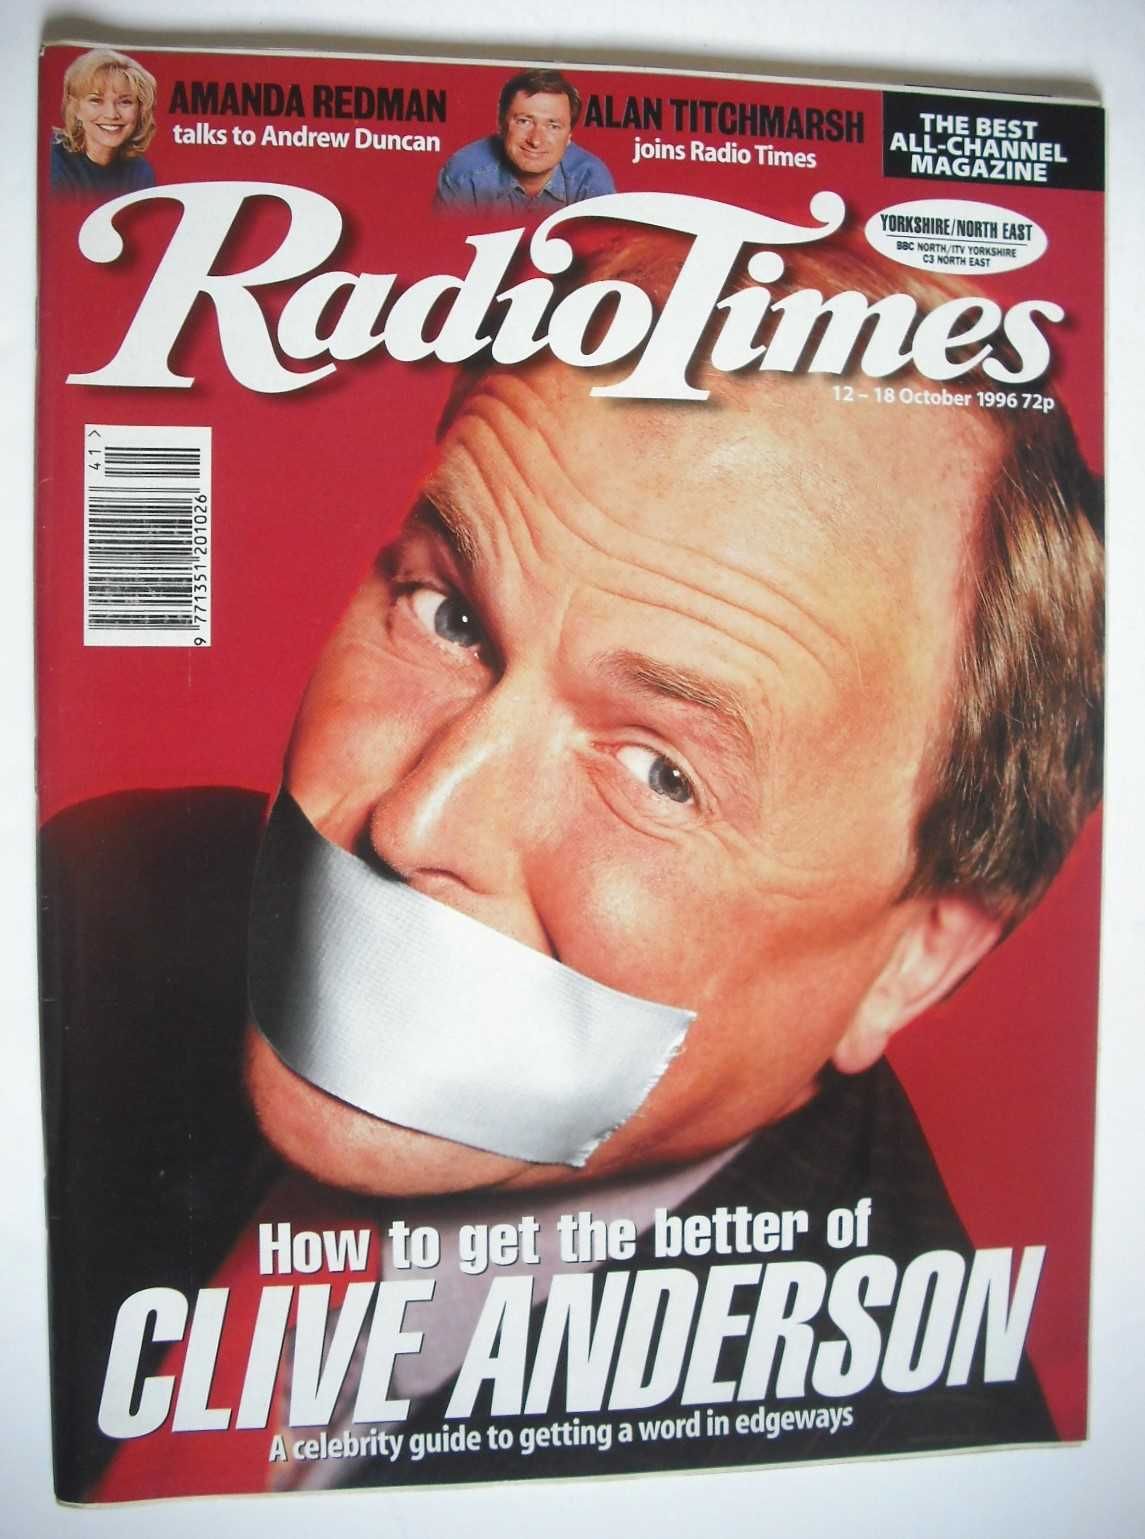 <!--1996-10-12-->Radio Times magazine - Clive Anderson cover (12-18 October